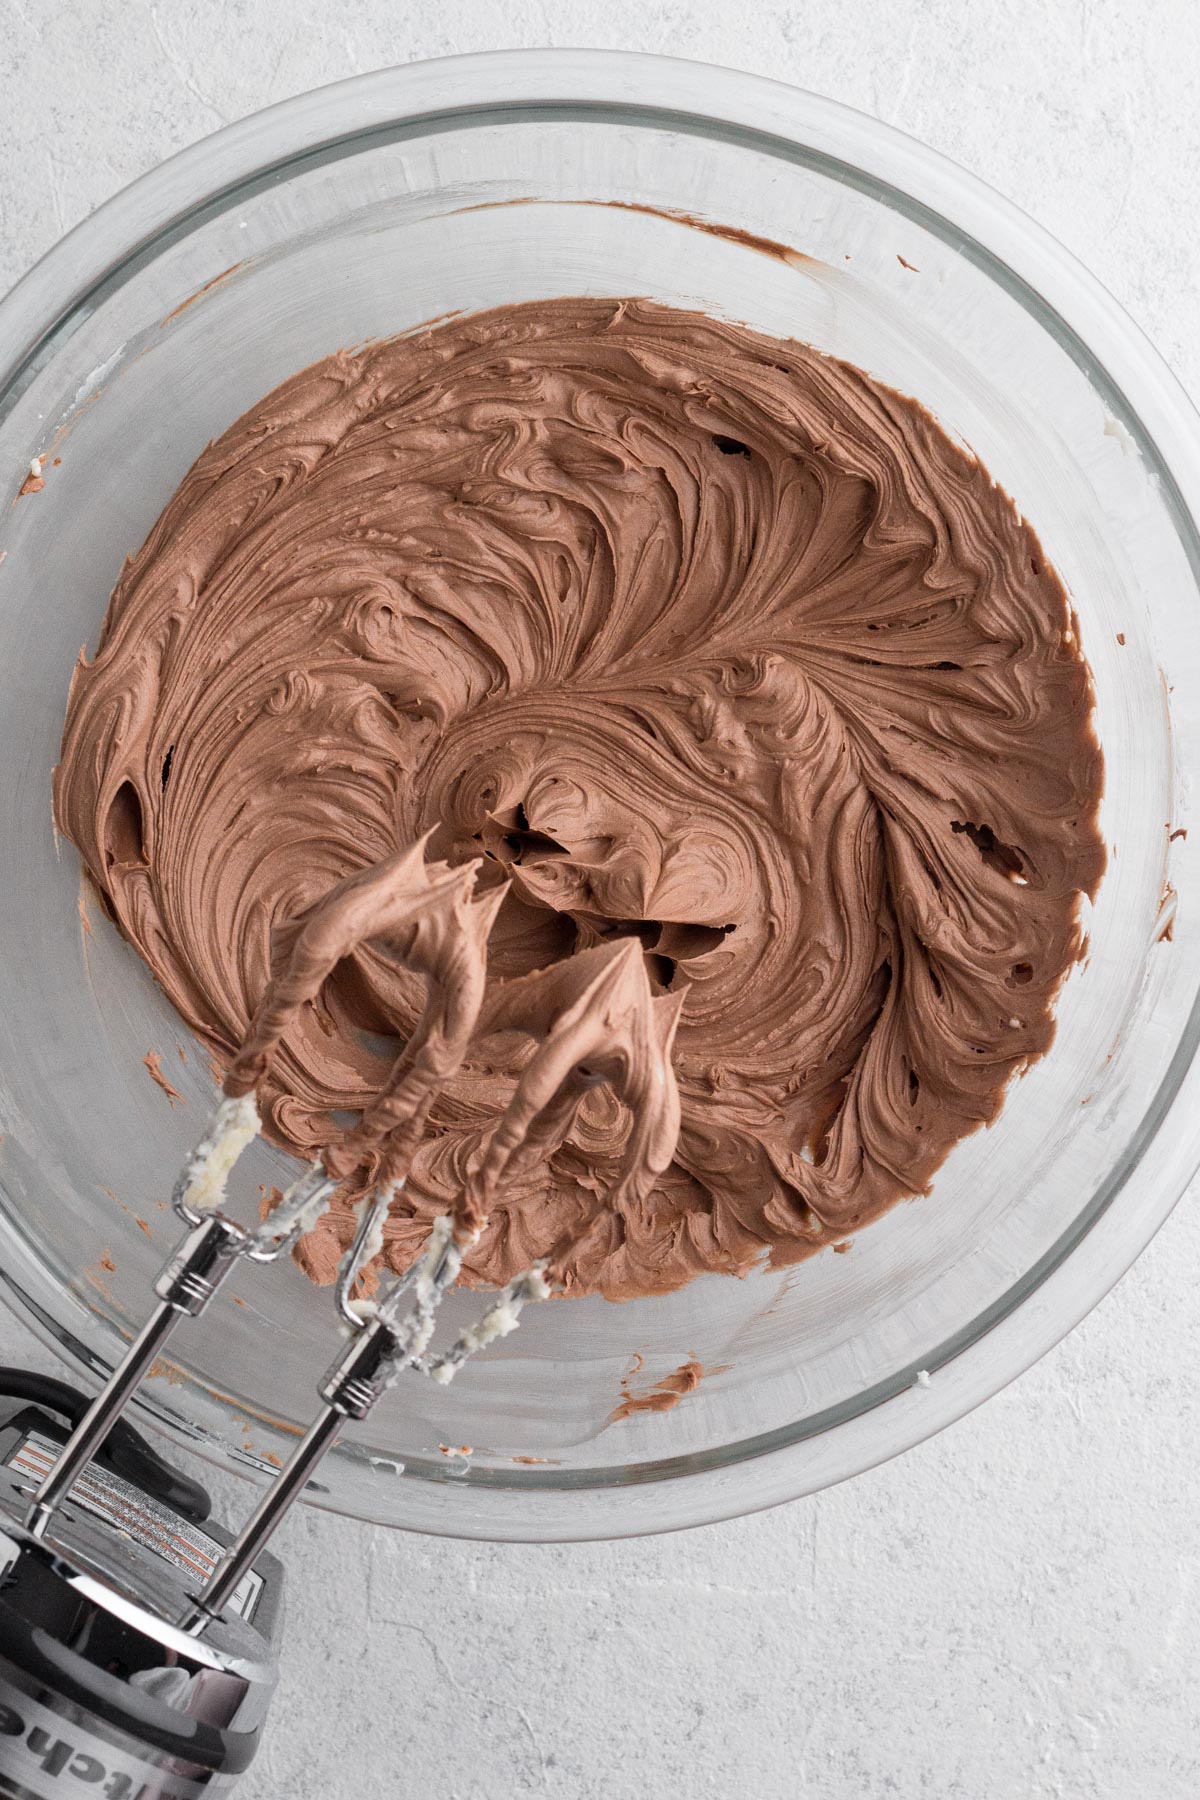 Beaten frosting in a glass mixing bowl with an electric hand mixer.